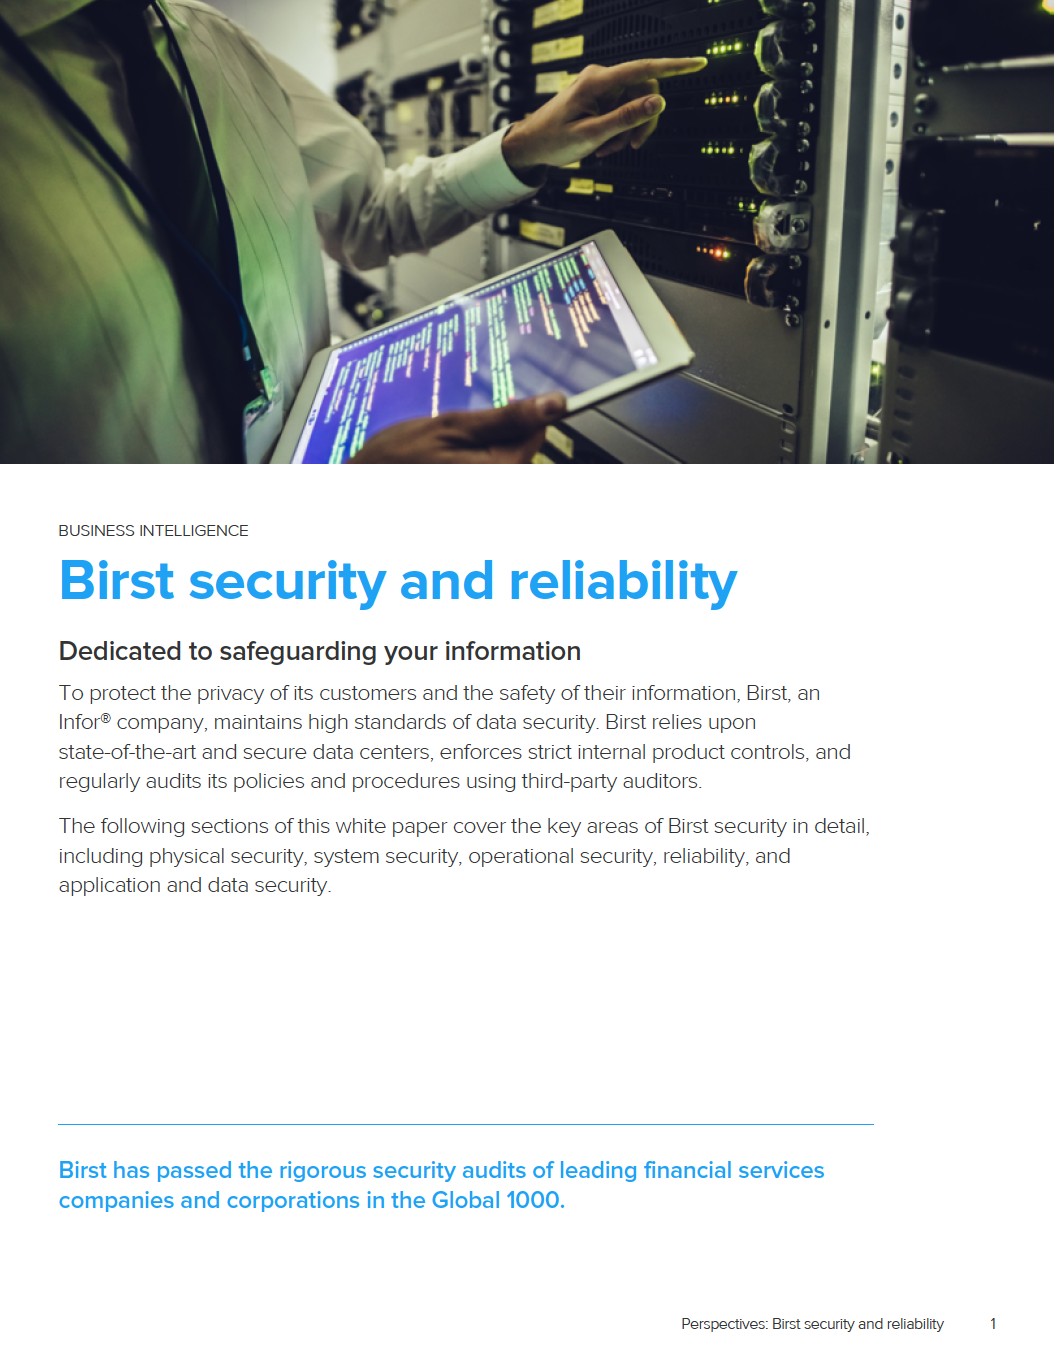 Manufacturing - Birst security and reliability